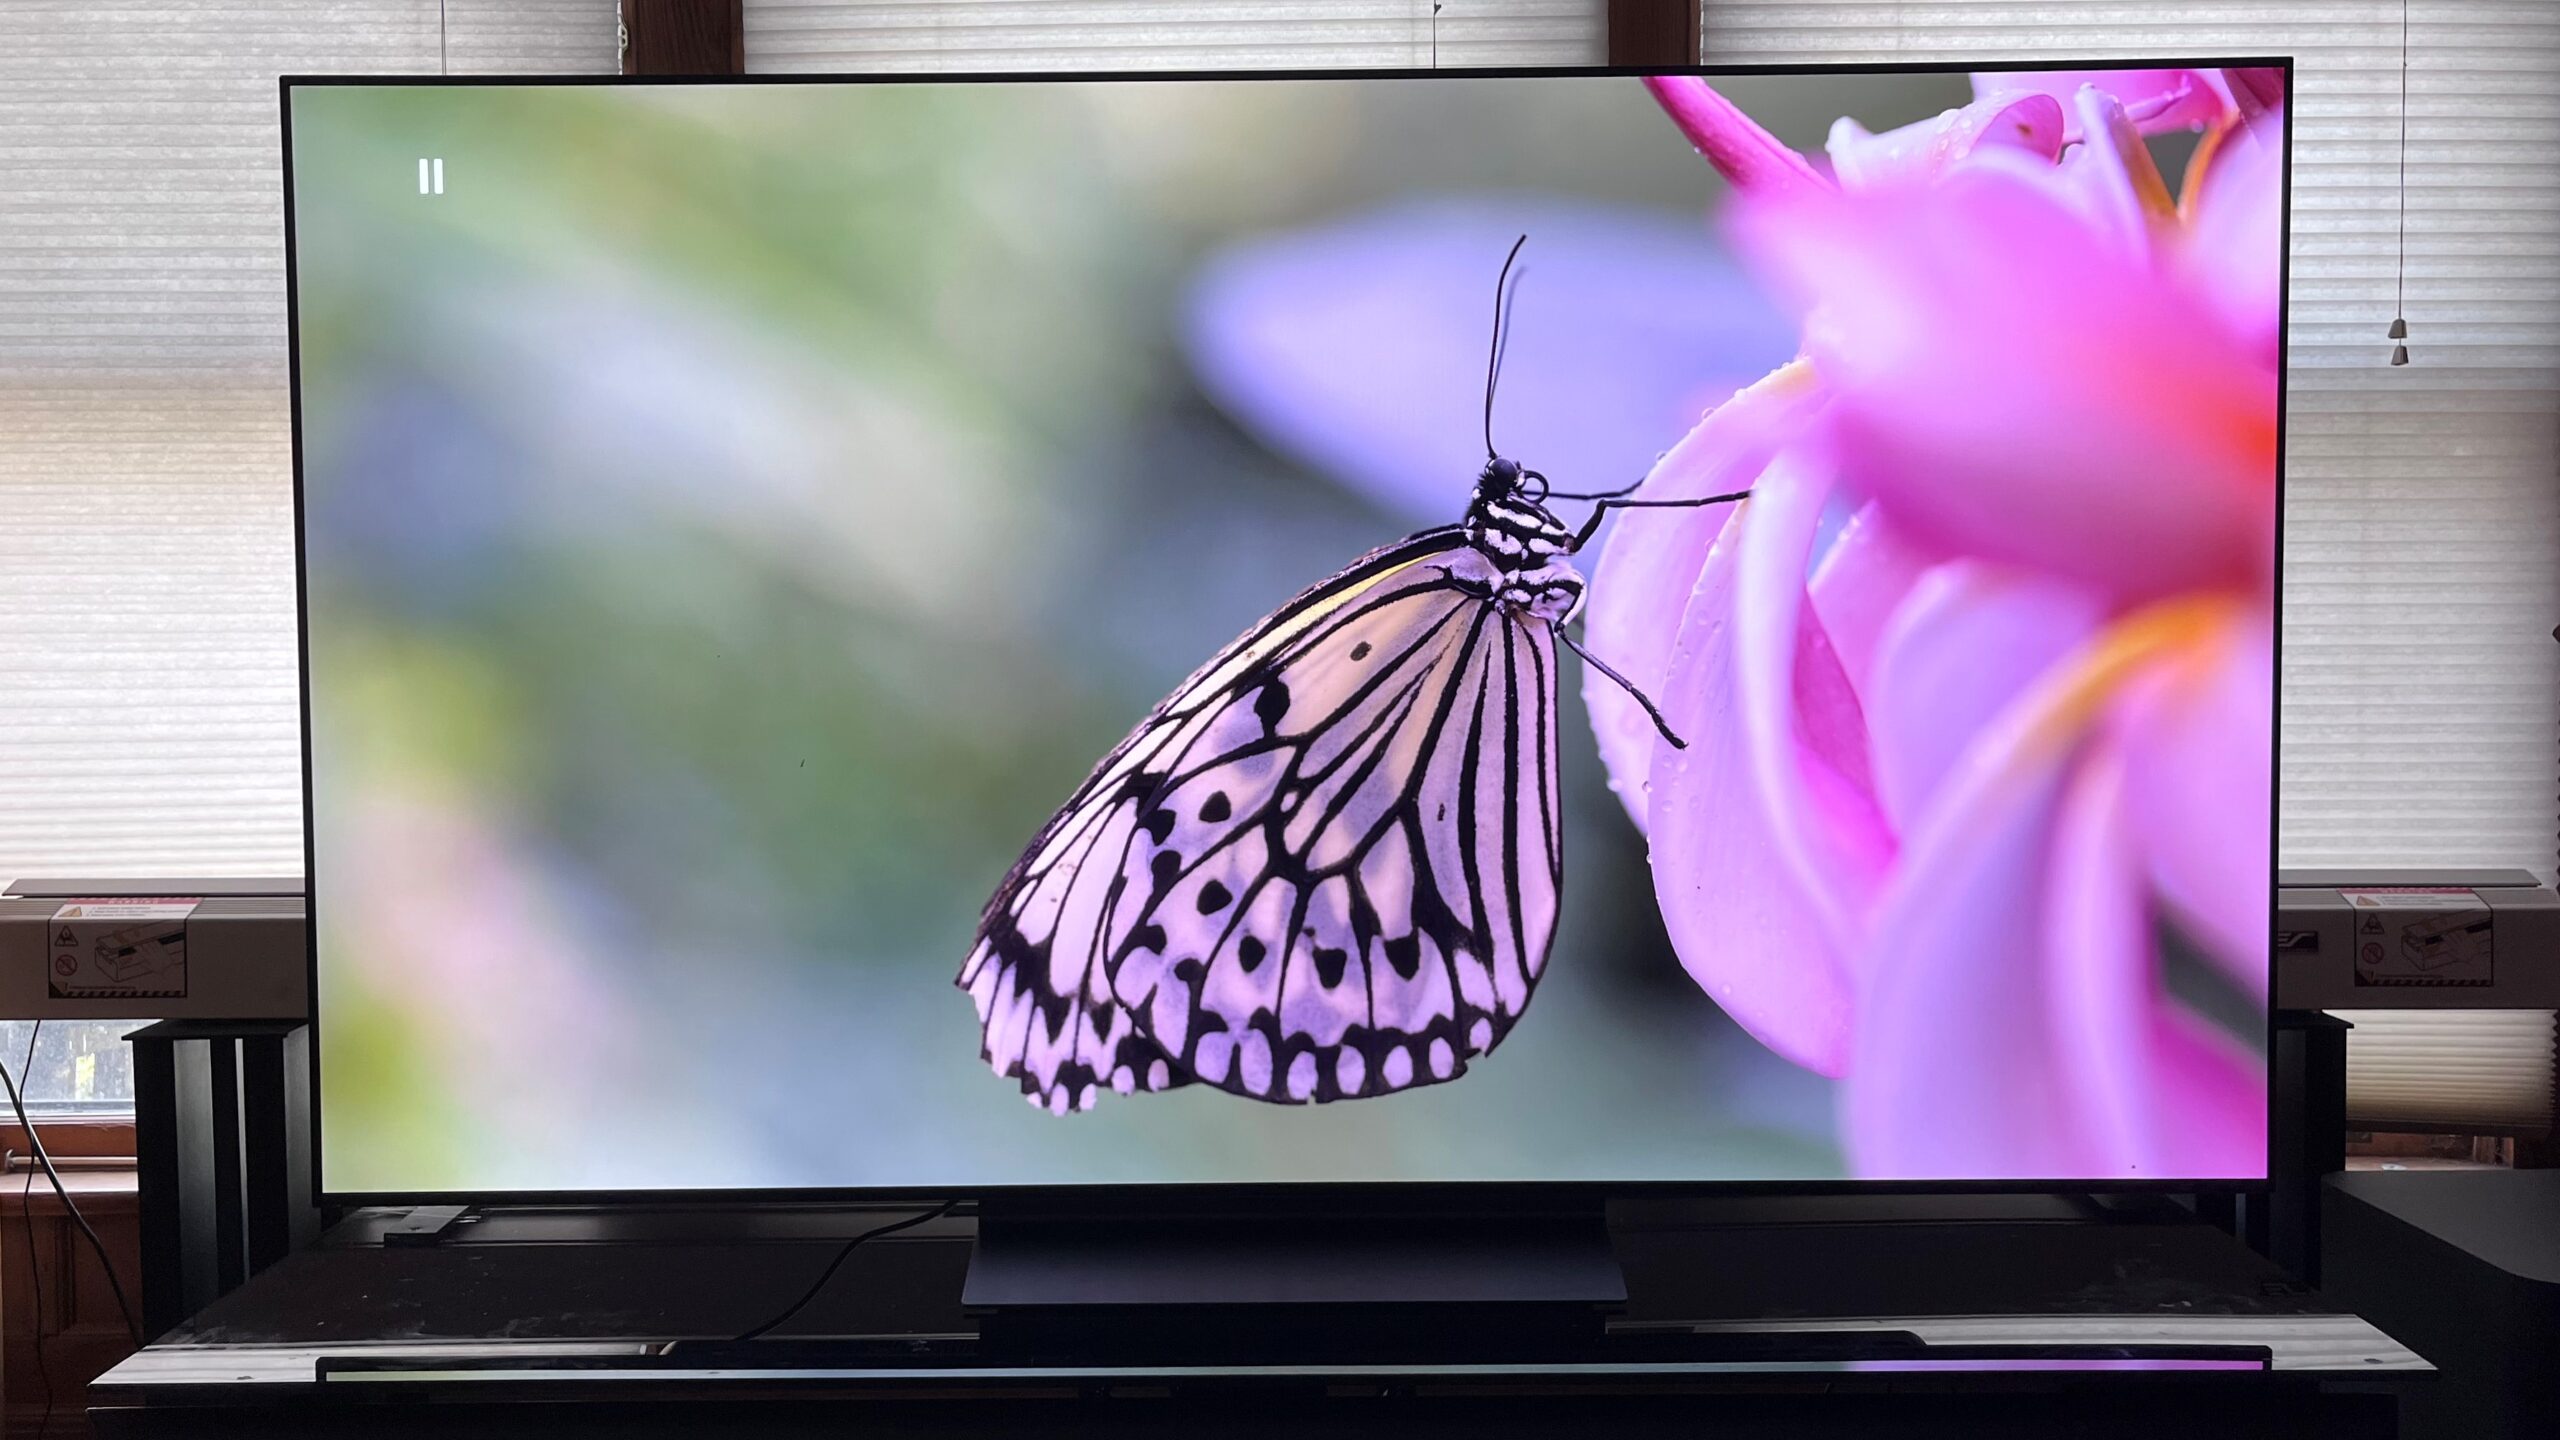 Let’s Talk About LG C3 OLED: A Mix of Trouble and Awesome Views